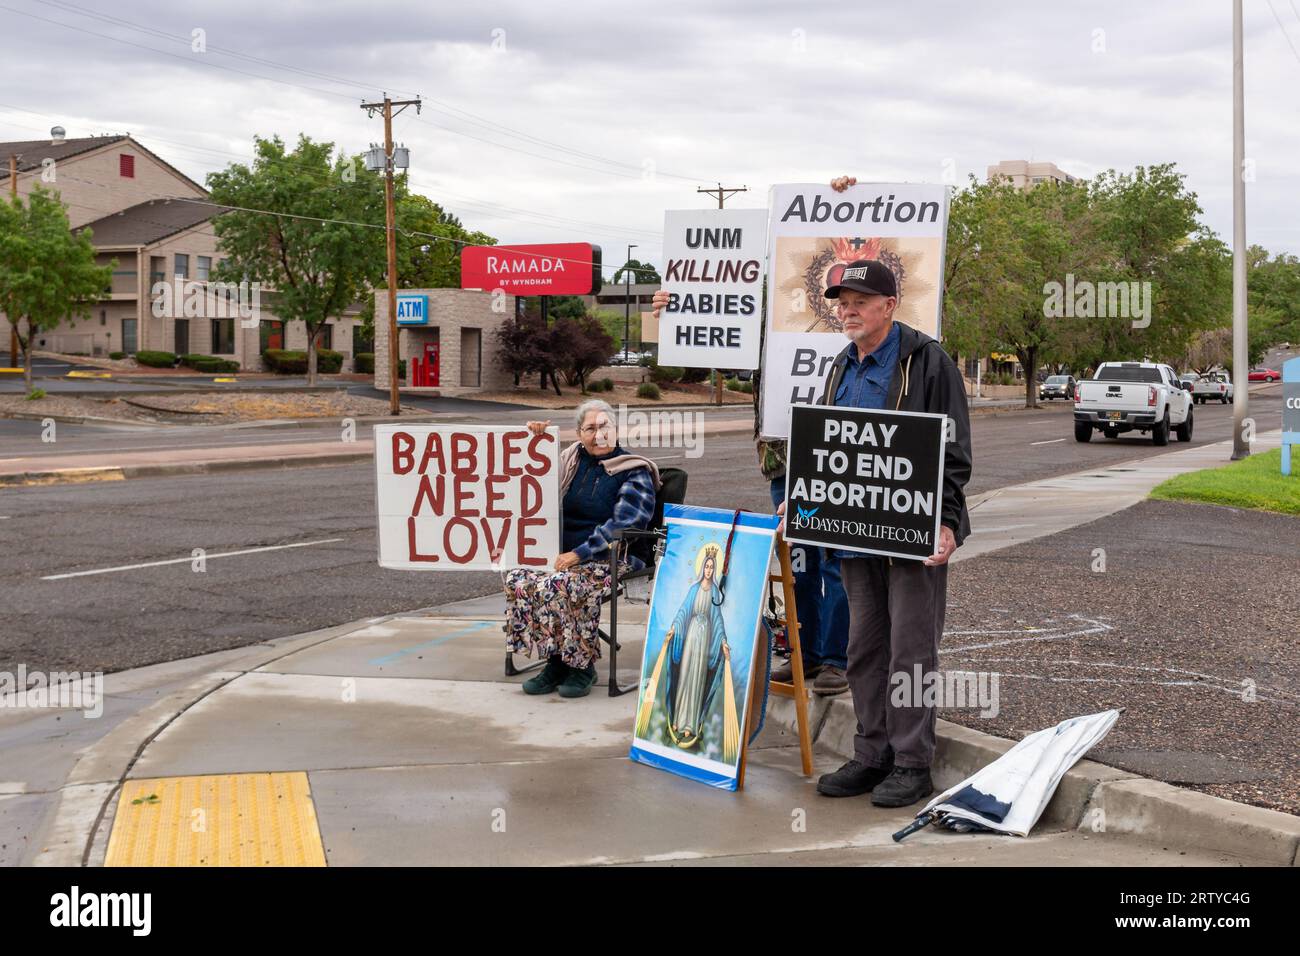 Senior protestors stand on street corner in Albuquerque, New Mexico, holding anti-abortion pro-life signs and a large image of Mother Mary. Stock Photo